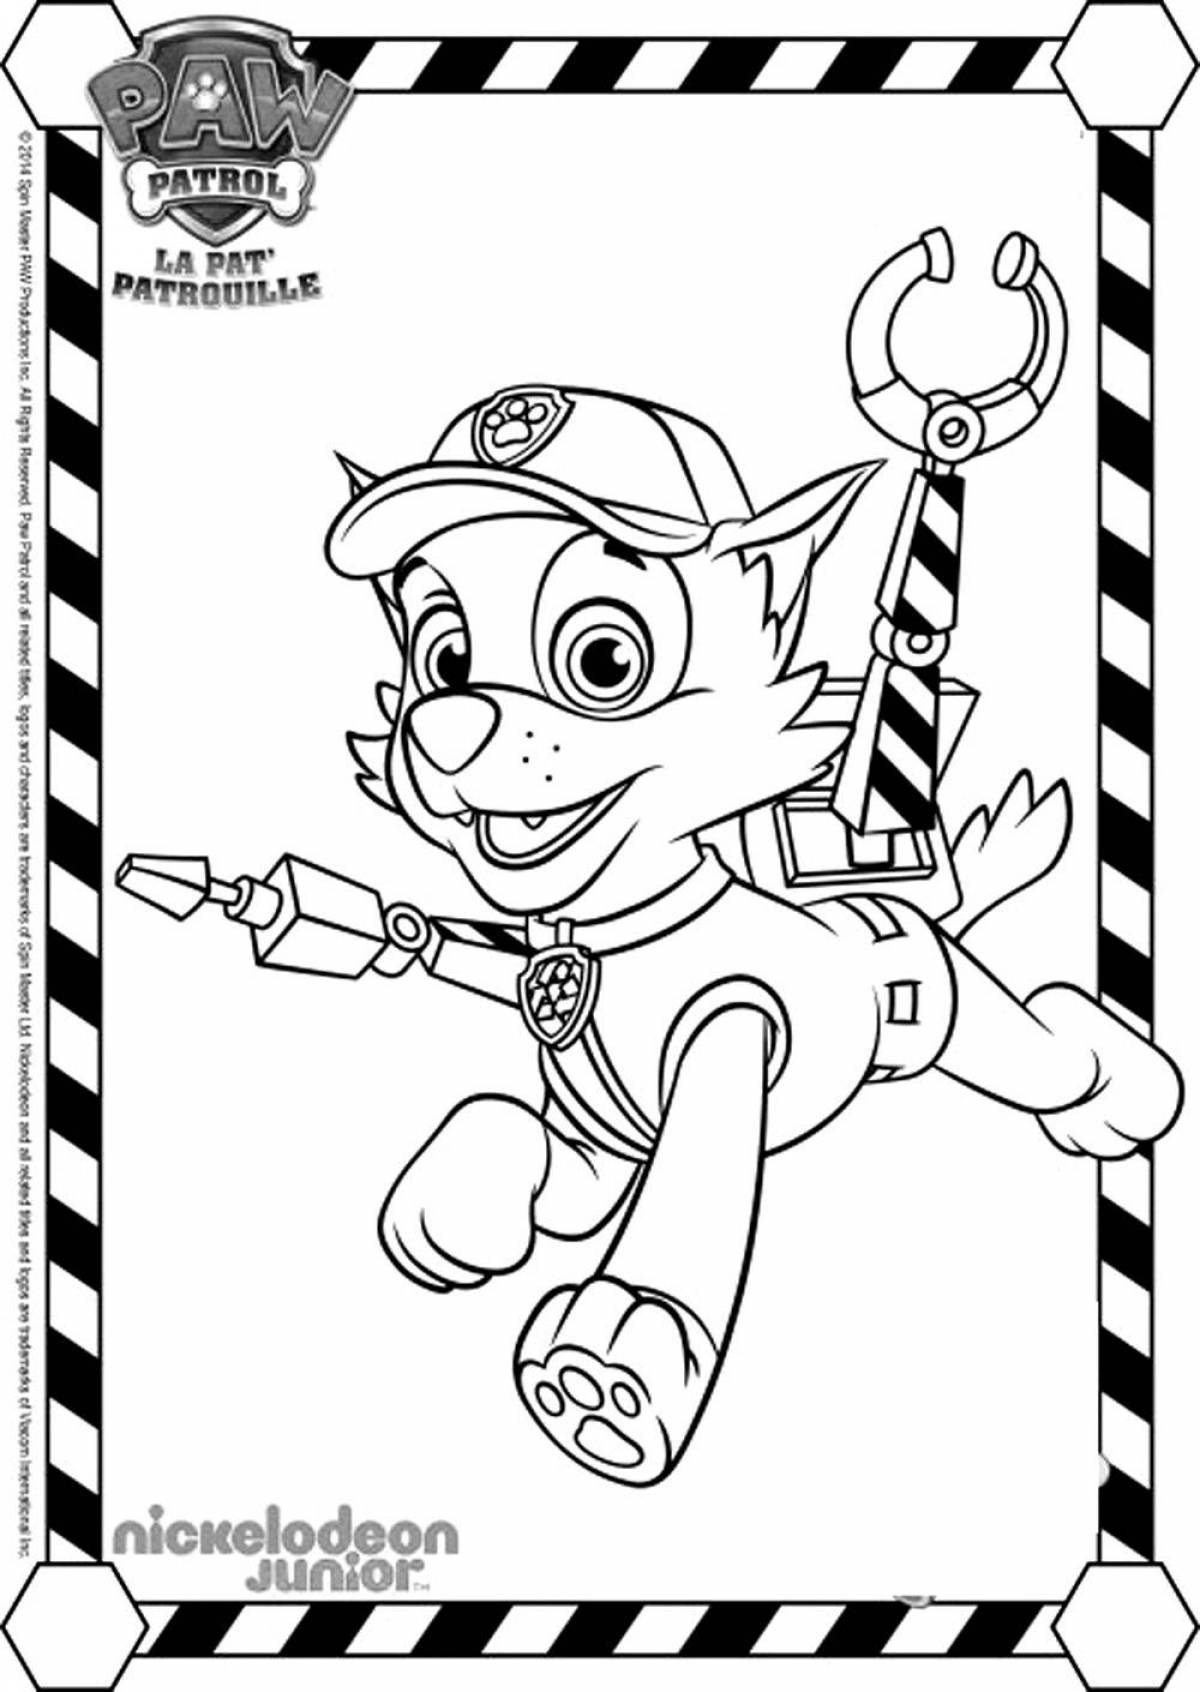 Friendly rocky paw patrol coloring book